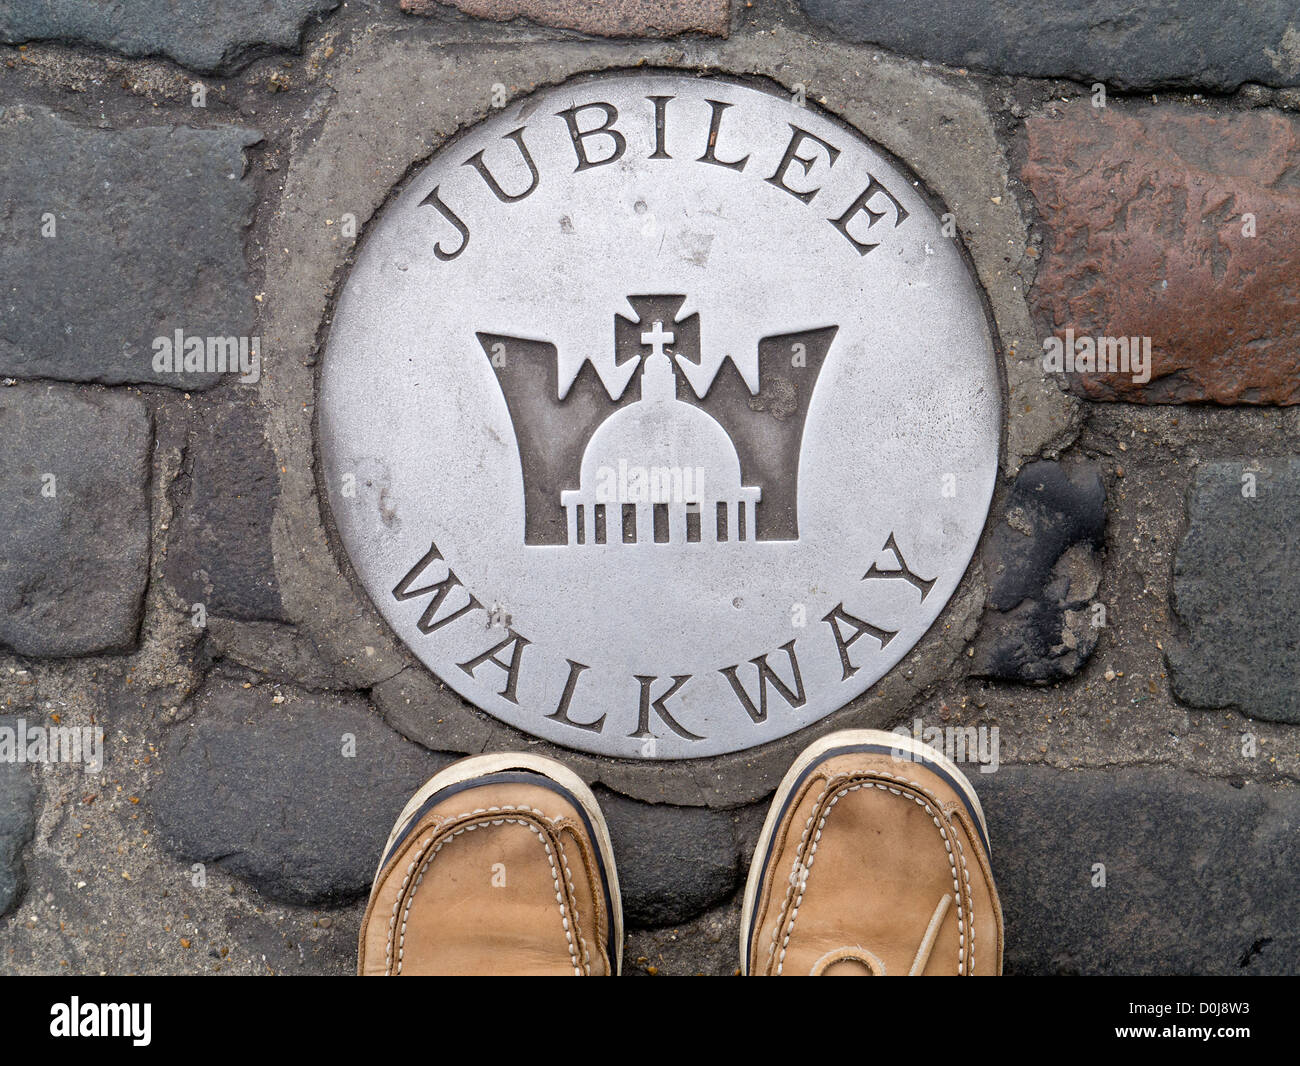 A Jubilee Walkway sign at Covent Garden in London. Stock Photo